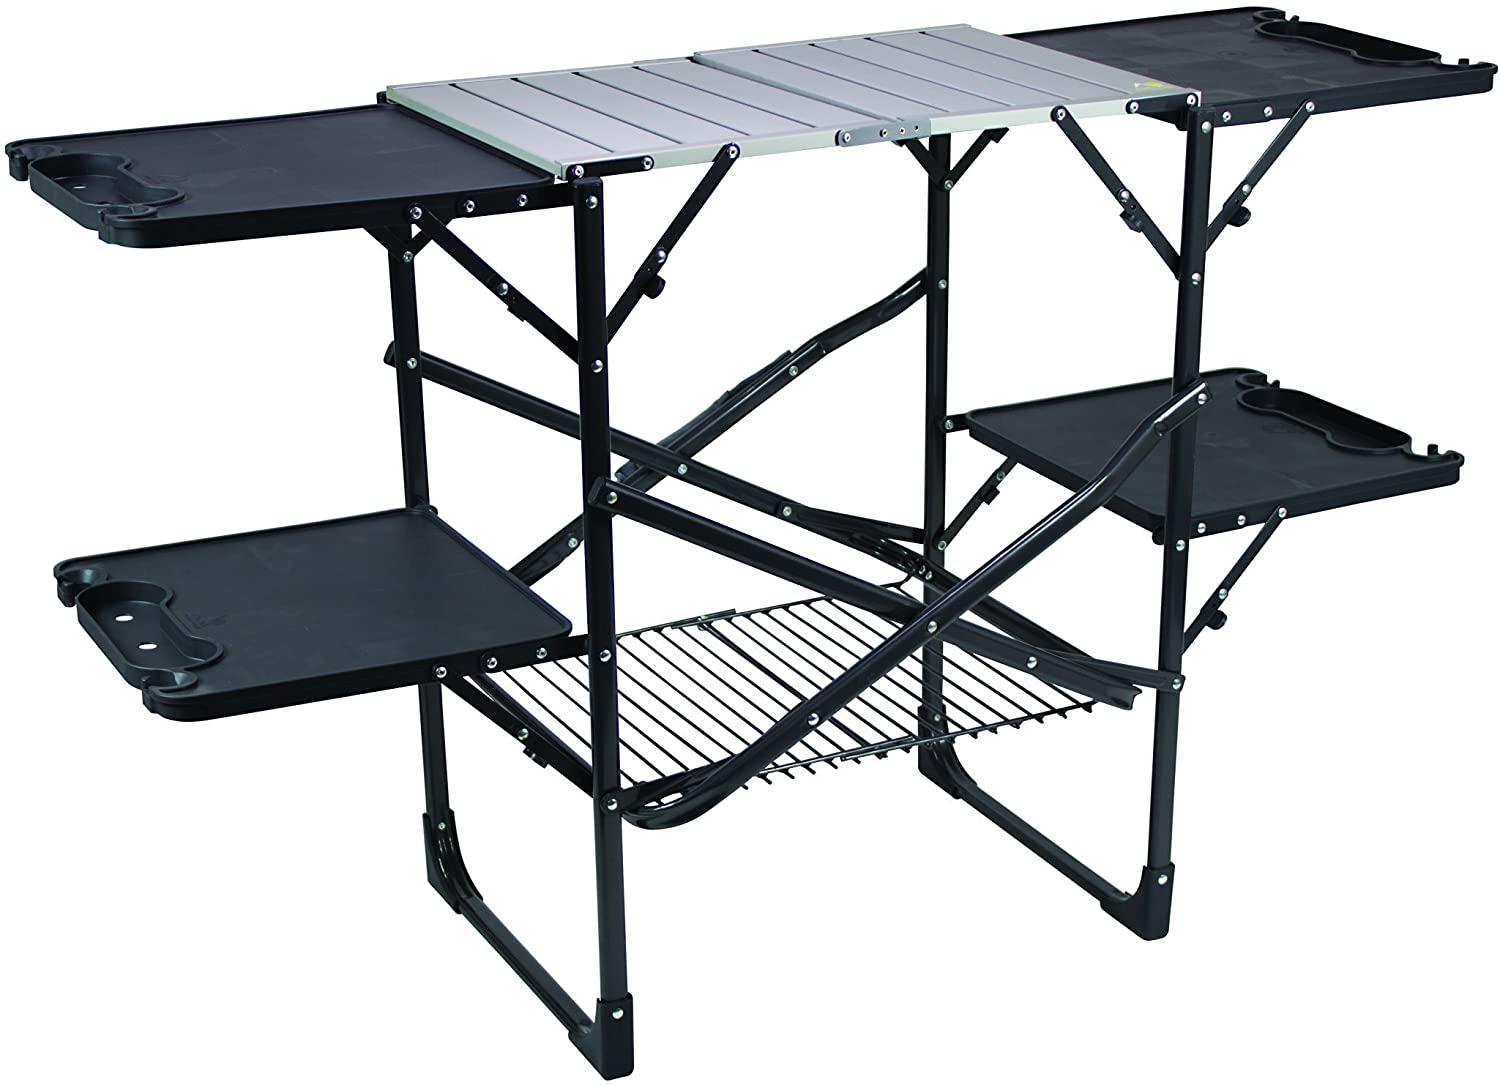 11 Best Camping Tables for Your Next Outdoor Trip in 2022